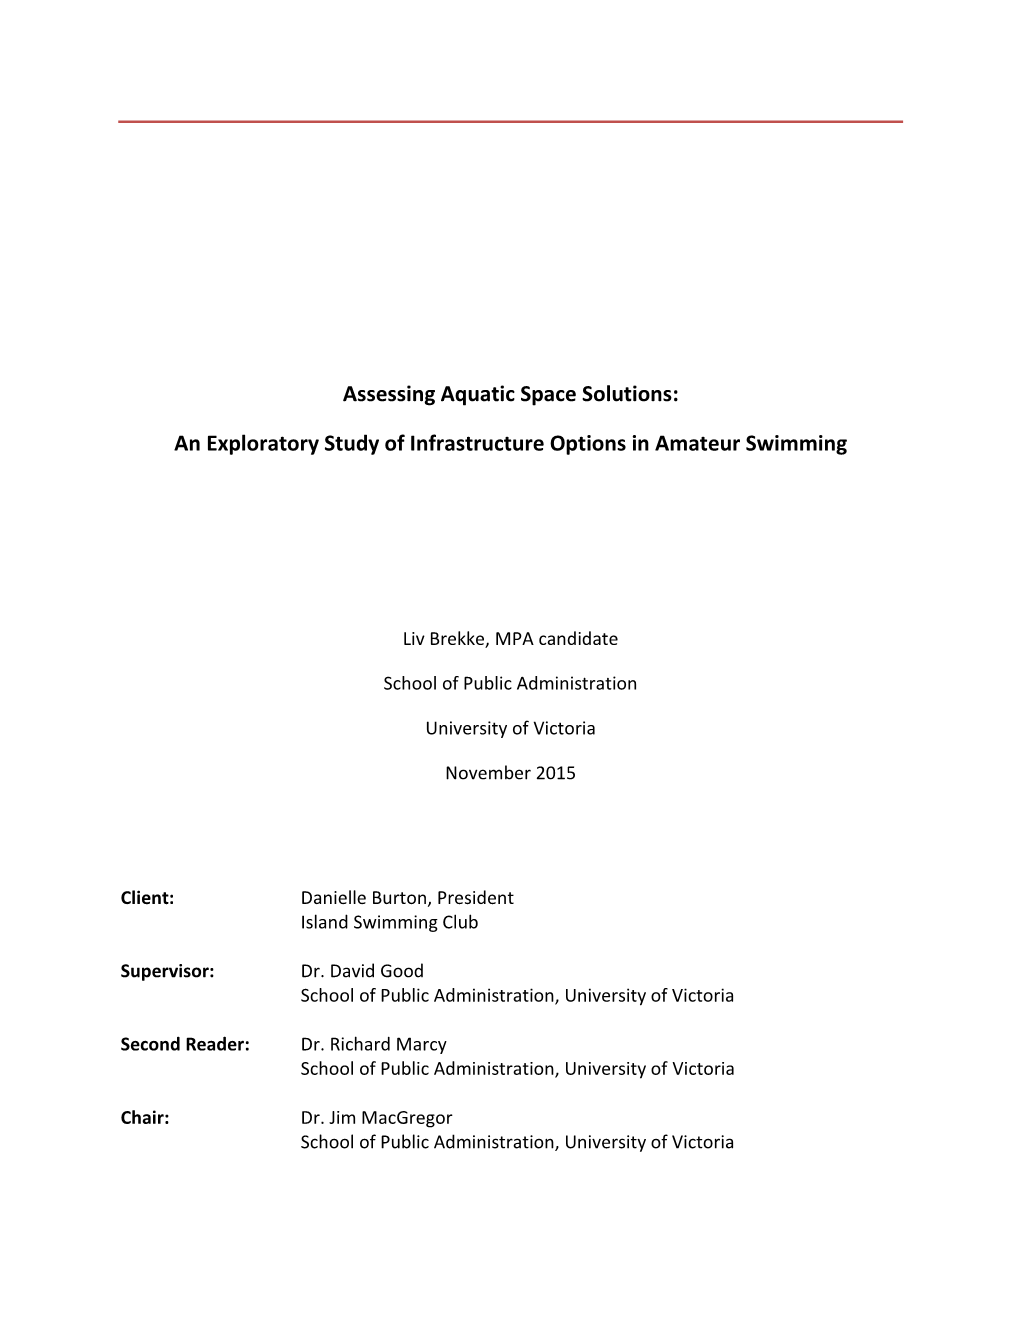 Assessing Aquatic Space Solutions: an Exploratory Study Of